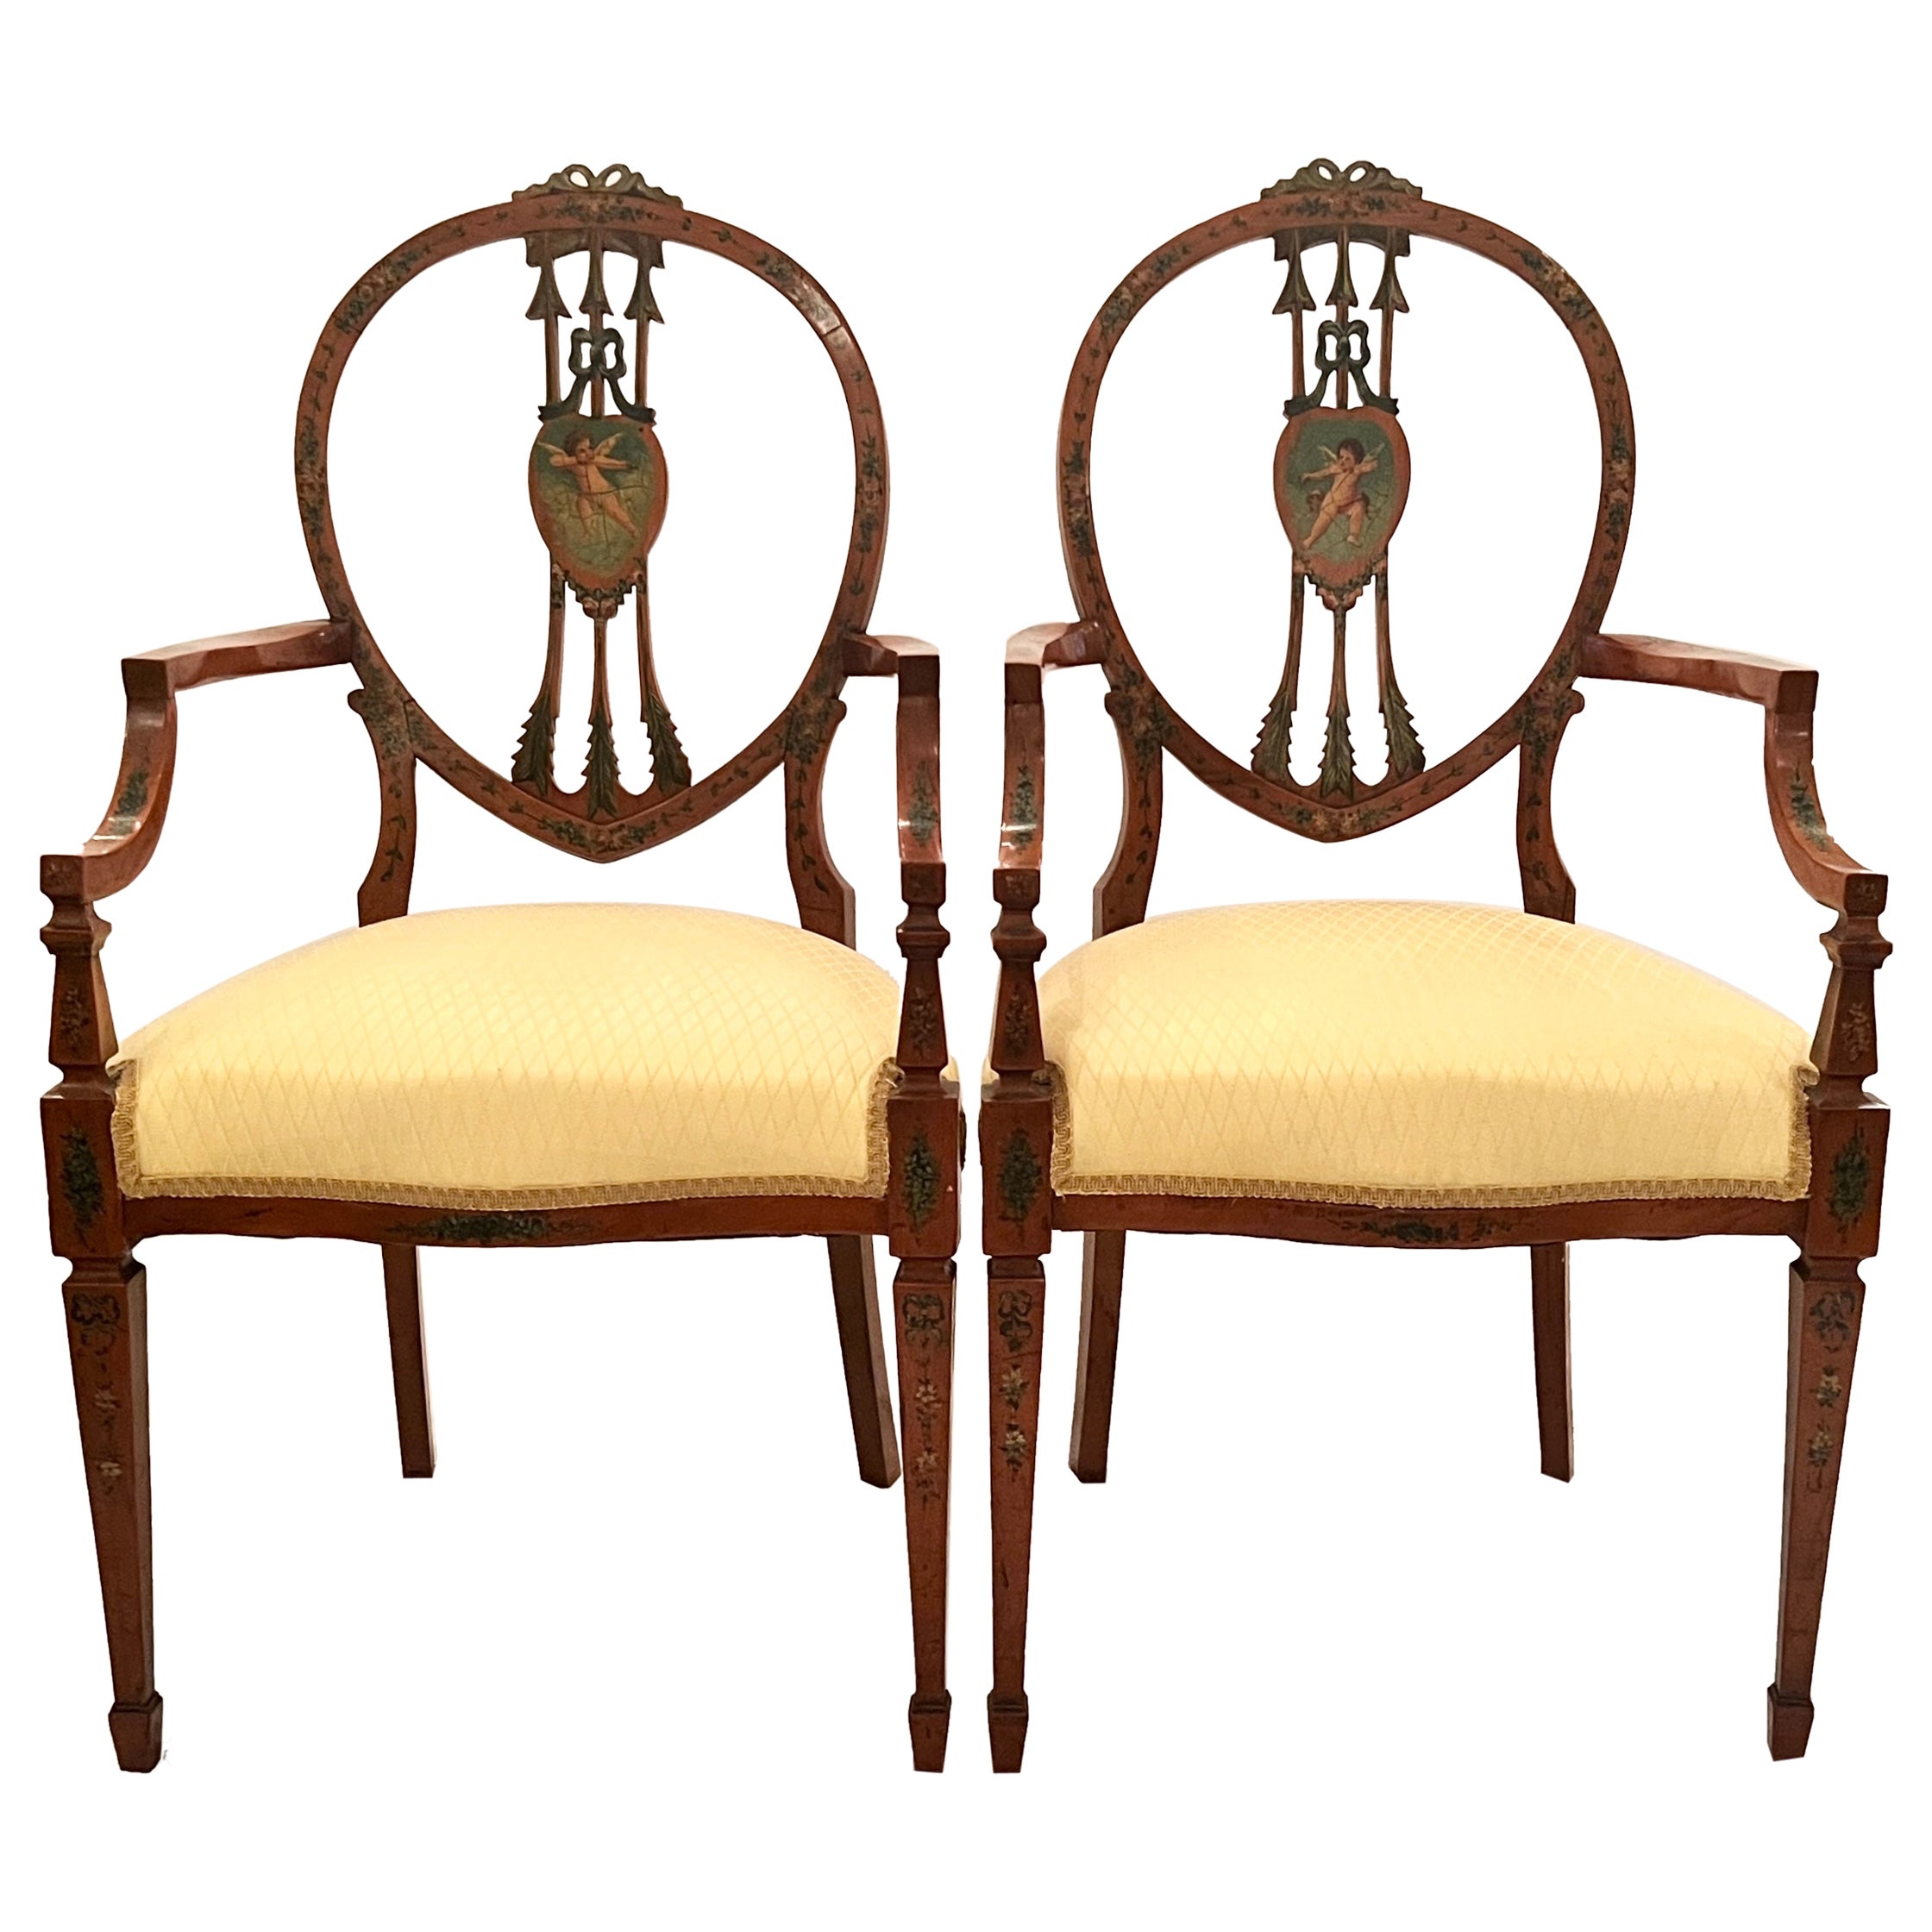 Pair Antique English Satinwood Arm-Chairs 1890-1910